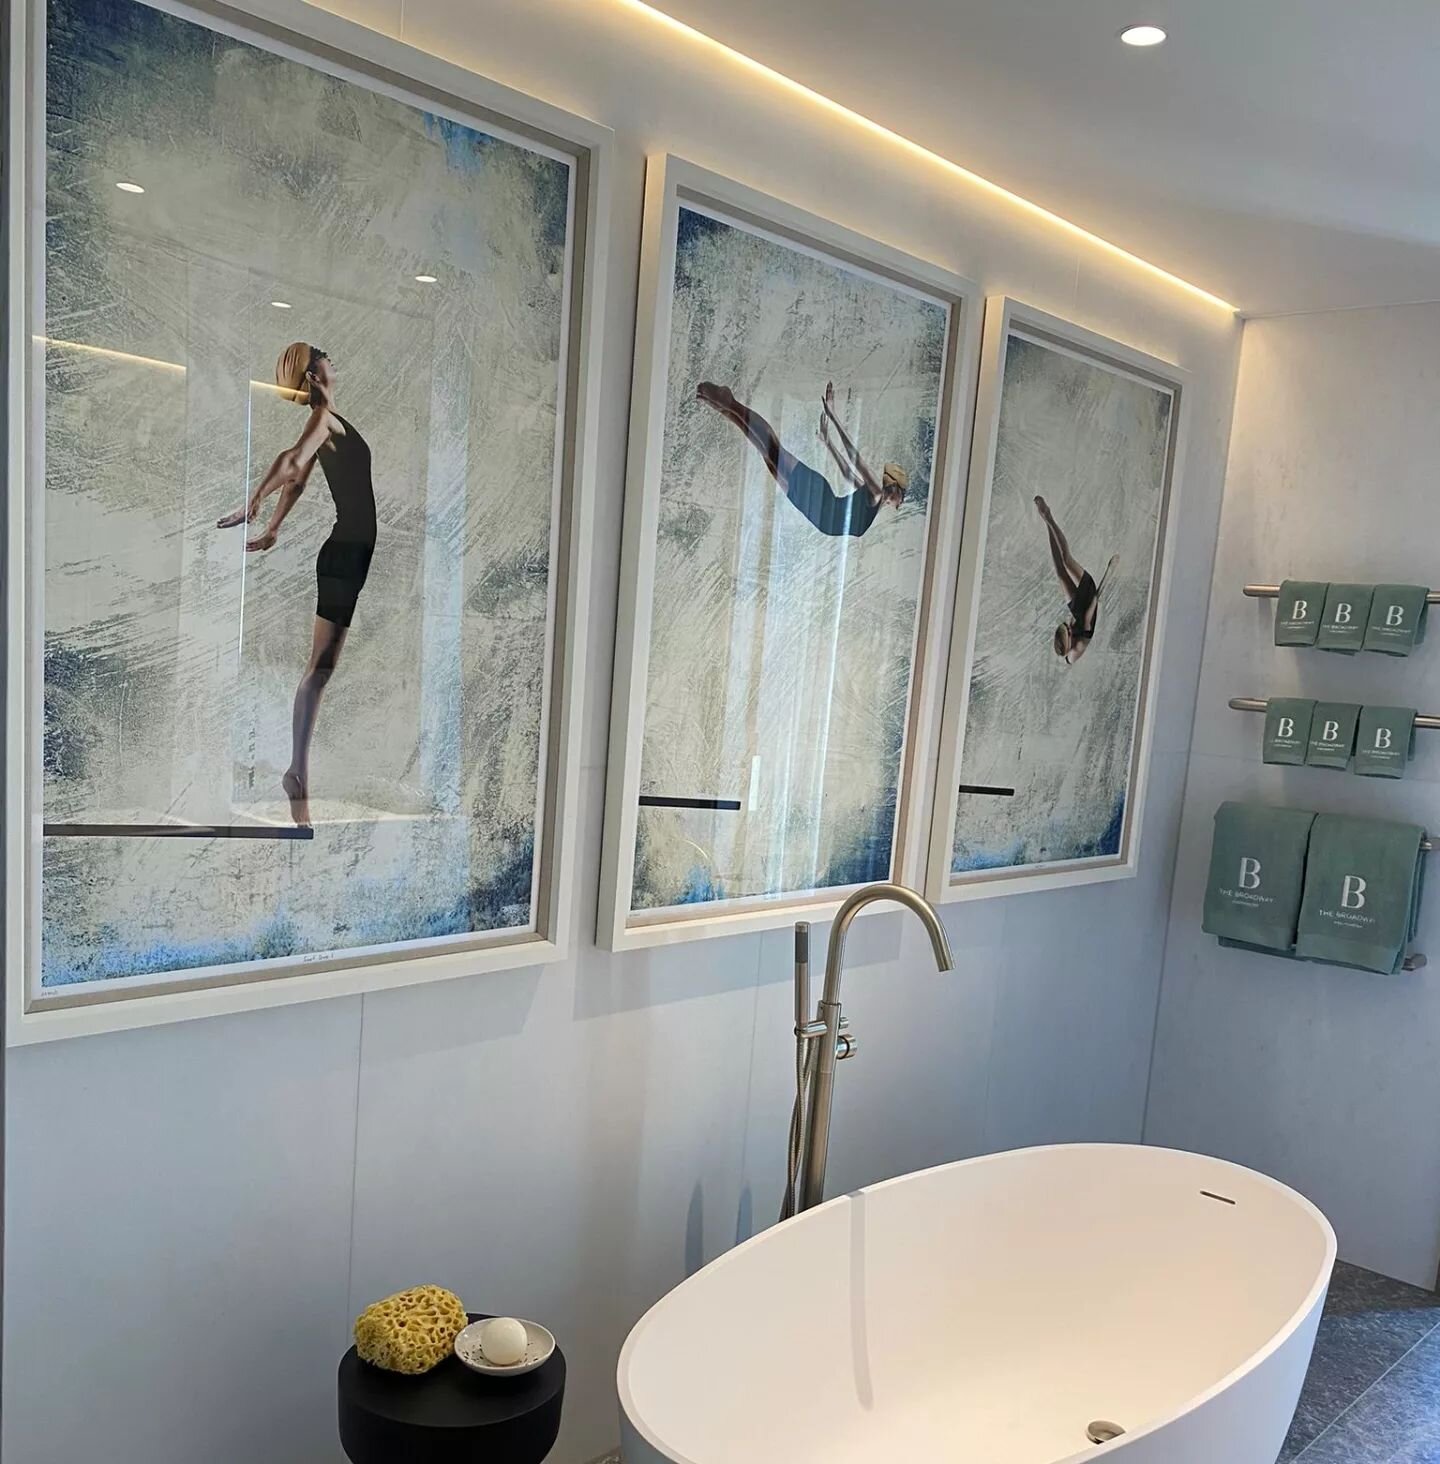 Diver artwork sourced for this master bathroom and cleverly hung on marble walls

#artconsultant #interiordesign #londoninteriors #contemporarydesign #artsourcing #aesthetic #bespoke #photography #artwork #londoninteriordesigner